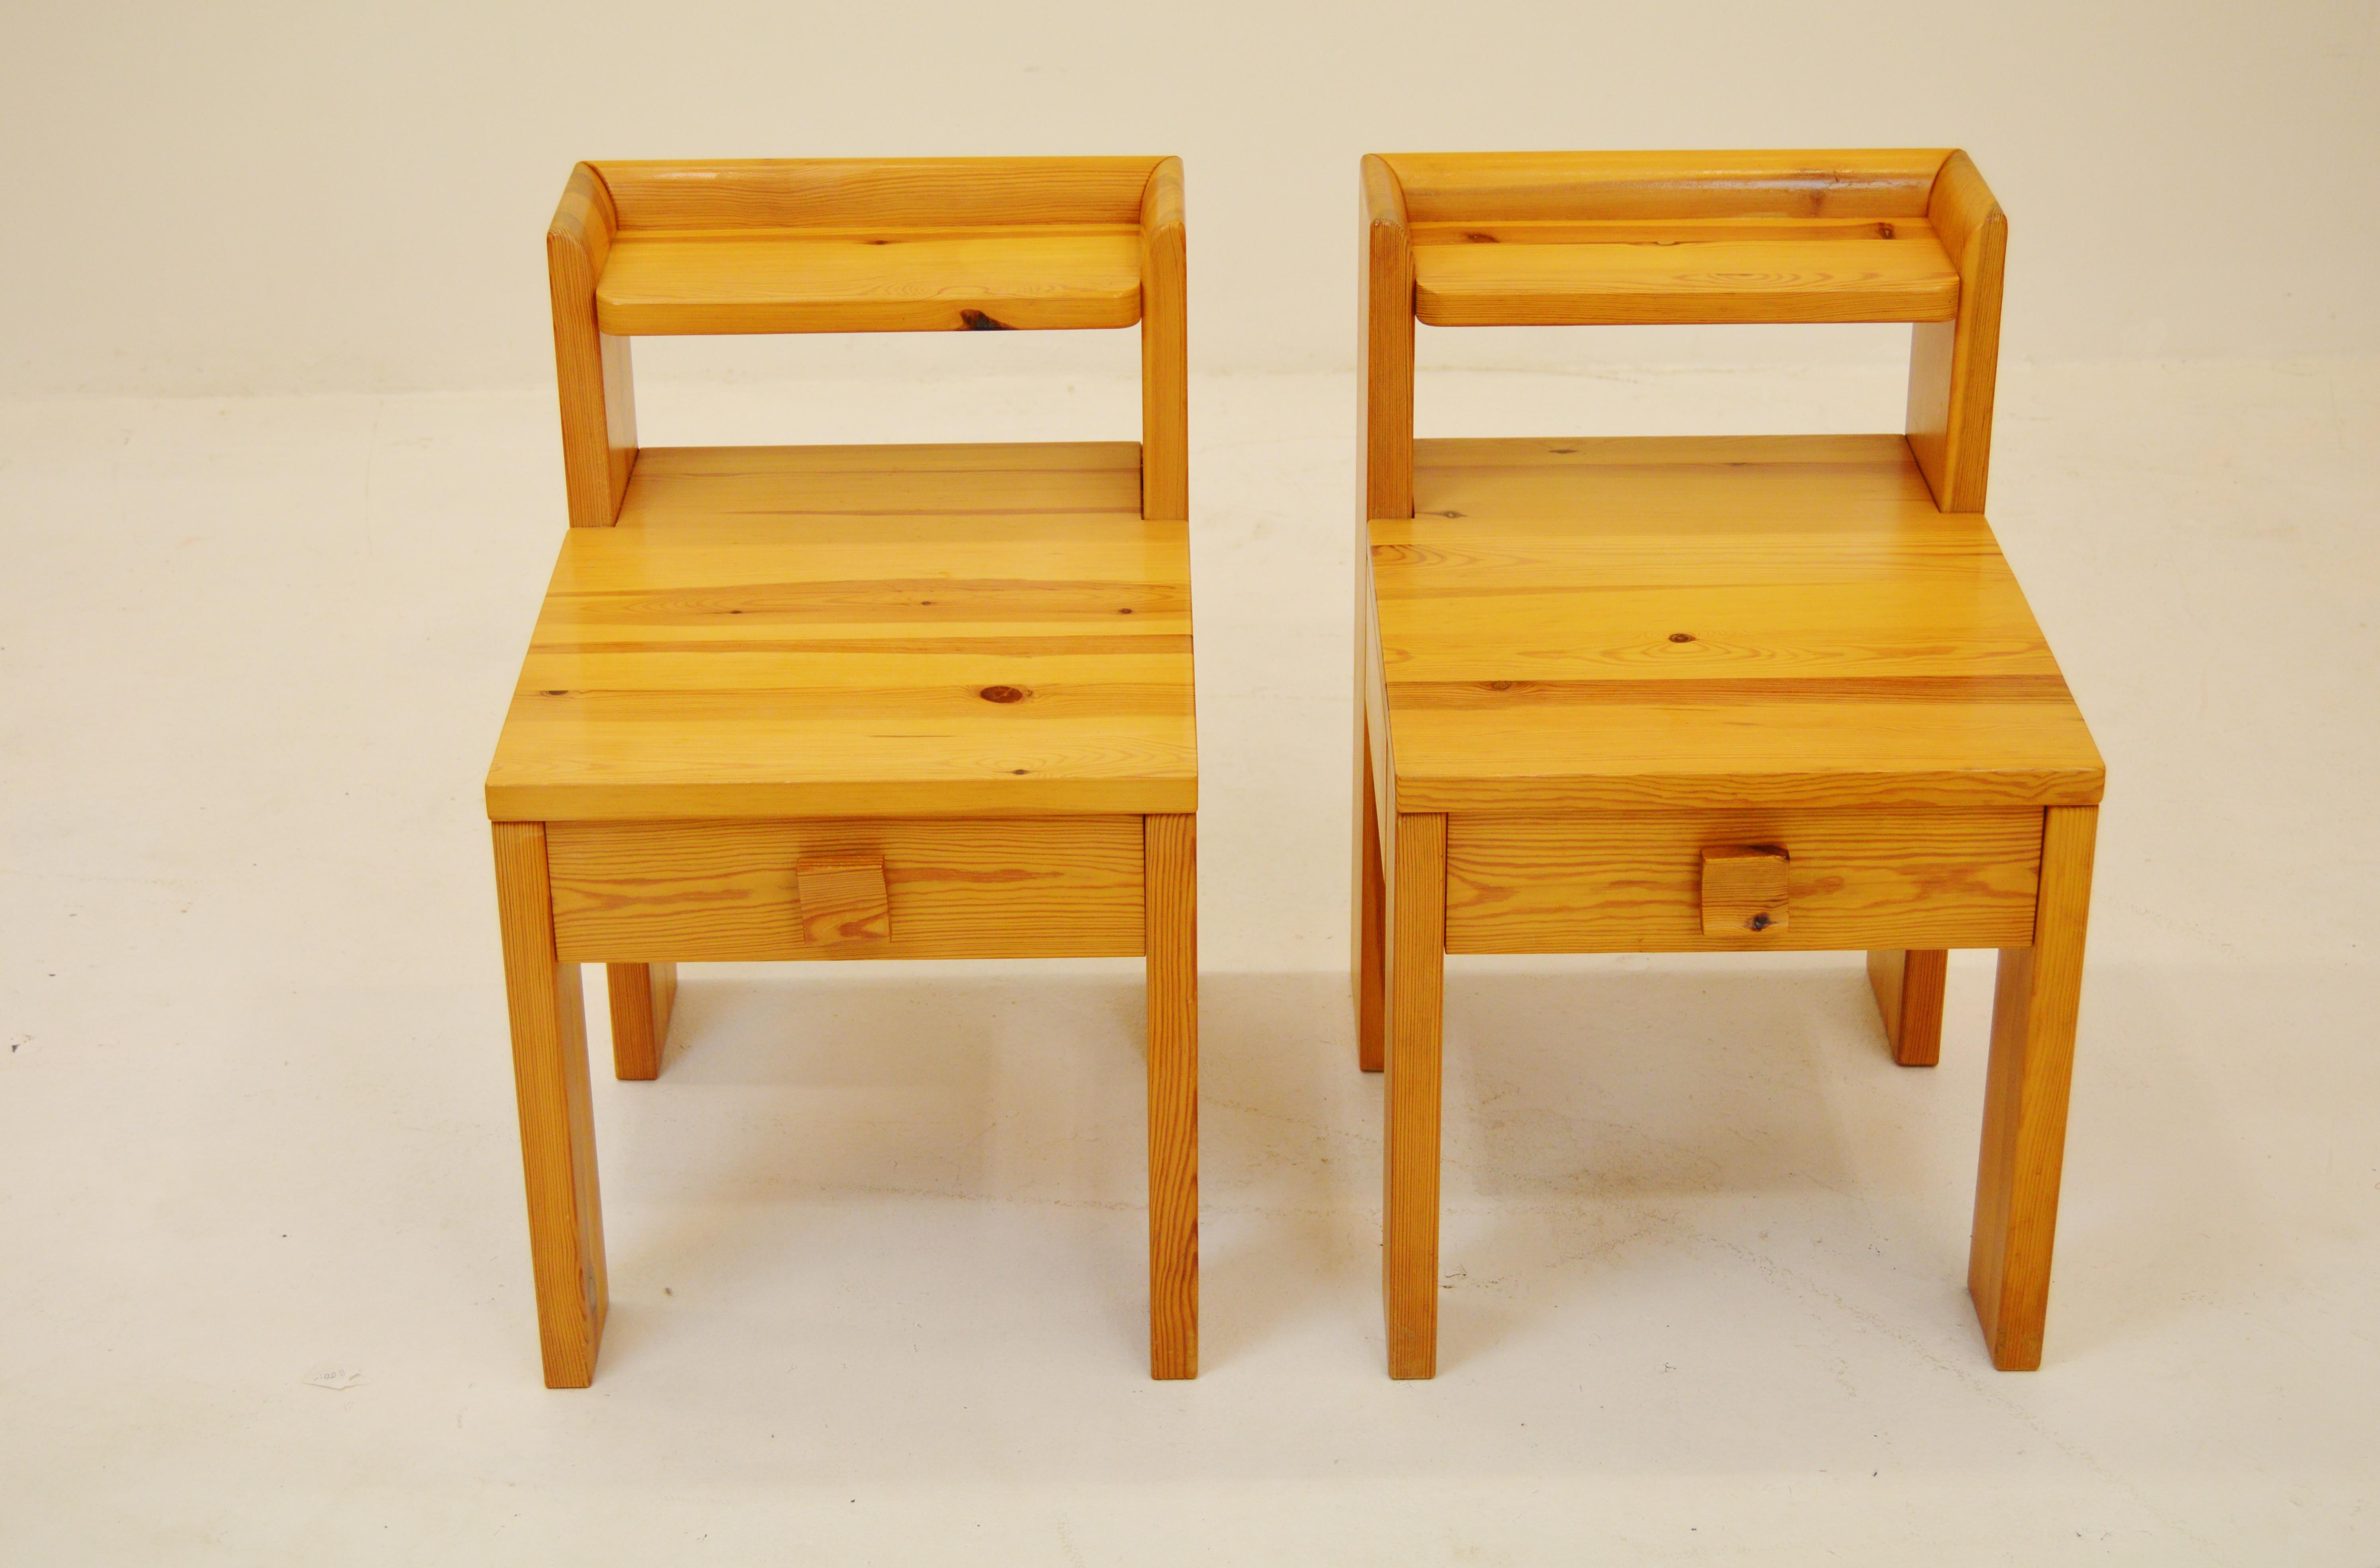 Scandinavian Modern Pair of Solid Pine Bedside Tables with Drawers For Sale